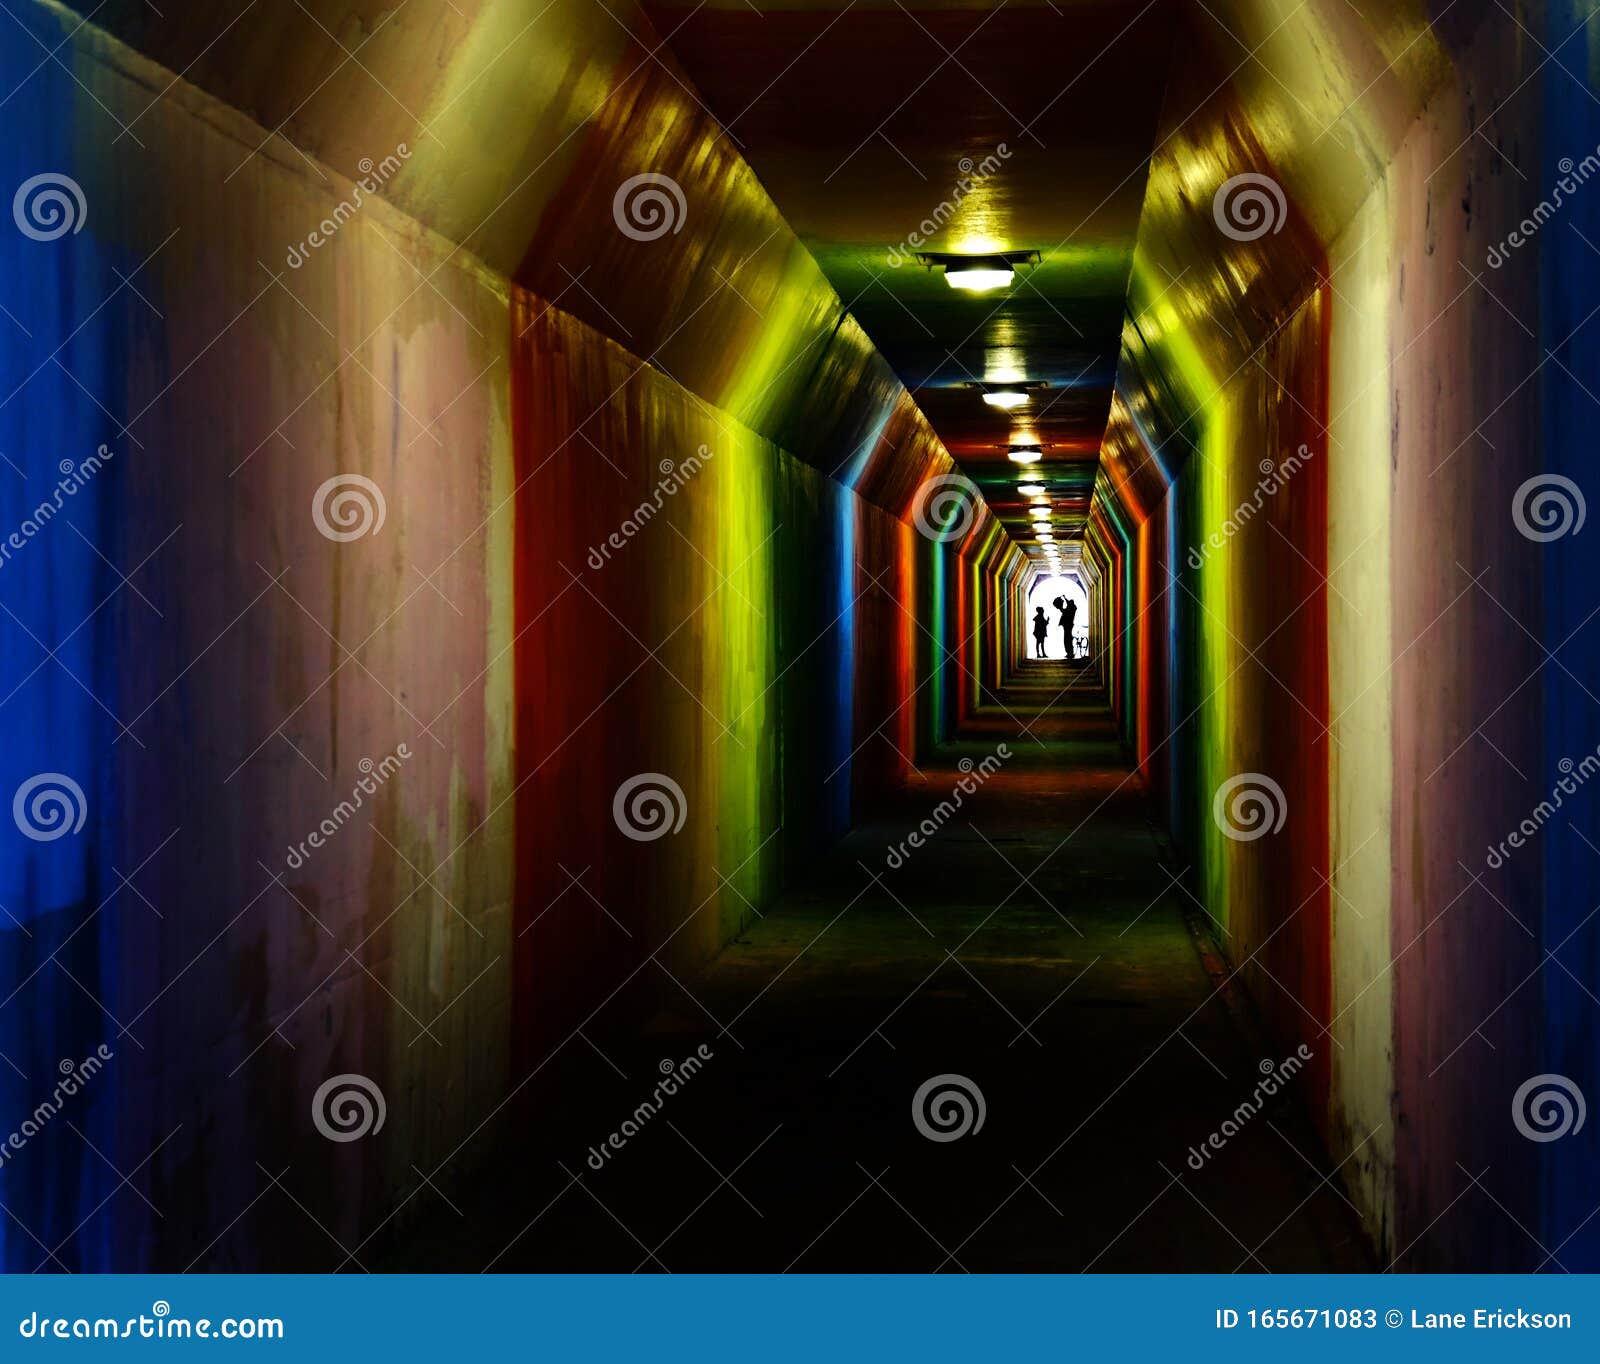 Colorful Tunnel Person Walking Silhouette Stock Image - Image of ... Silhouette Man Walking Tunnel